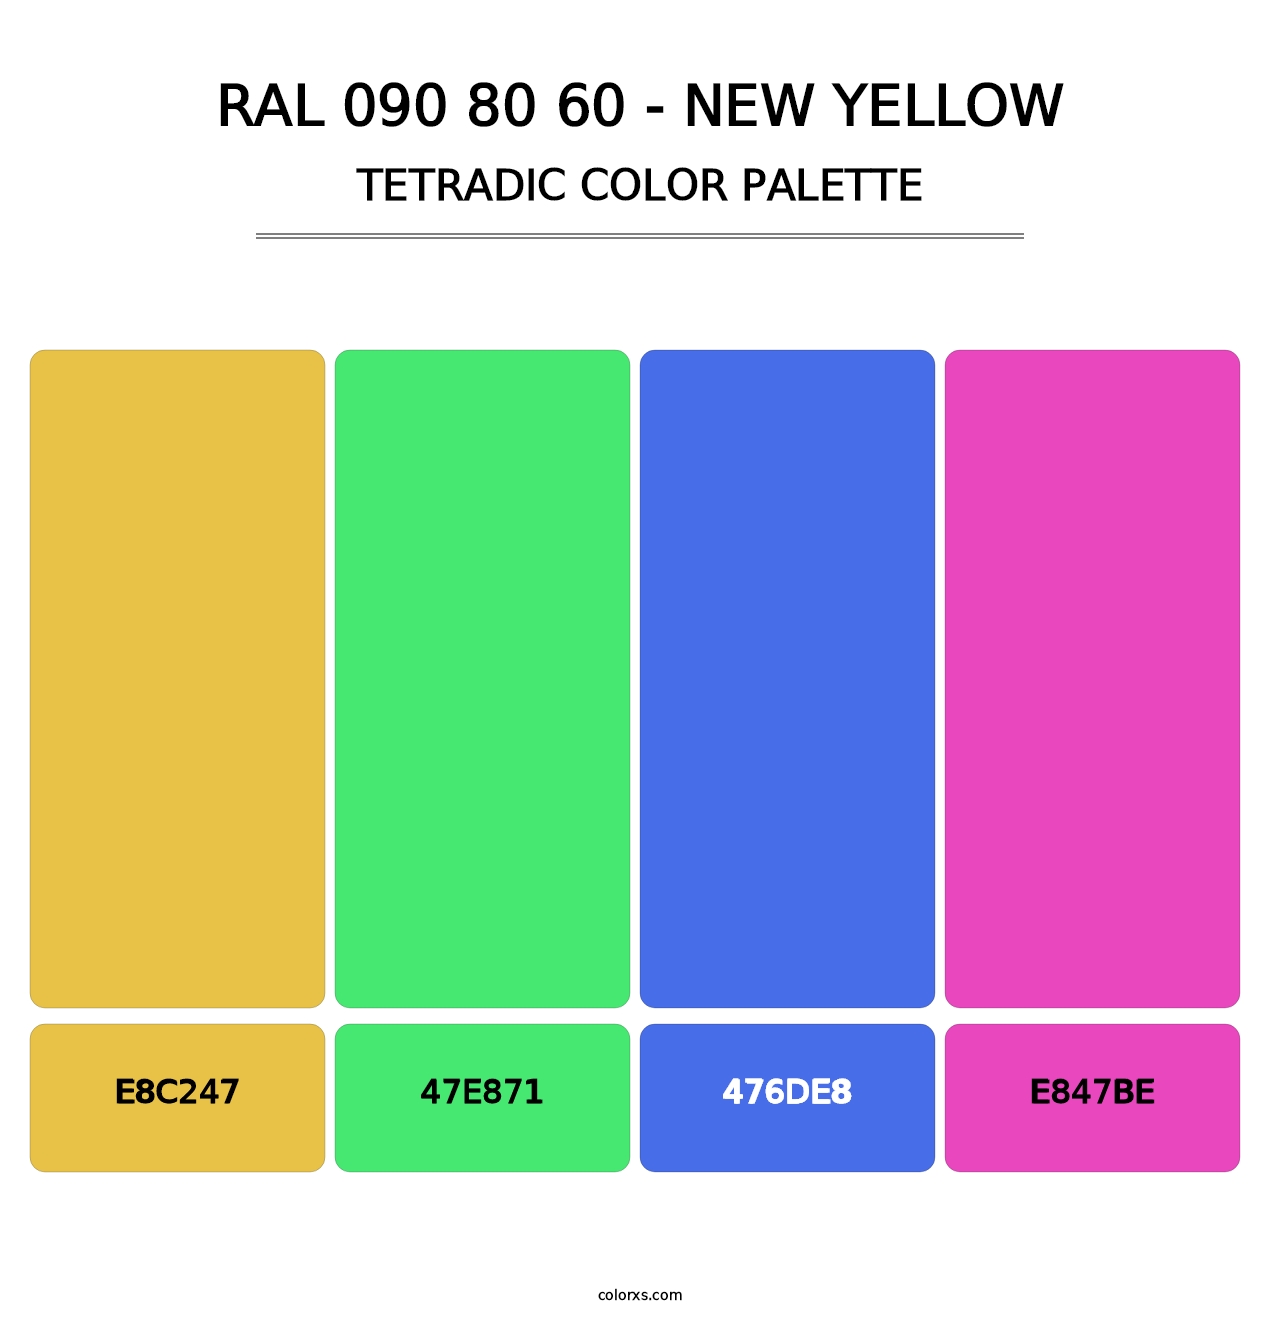 RAL 090 80 60 - New Yellow - Tetradic Color Palette